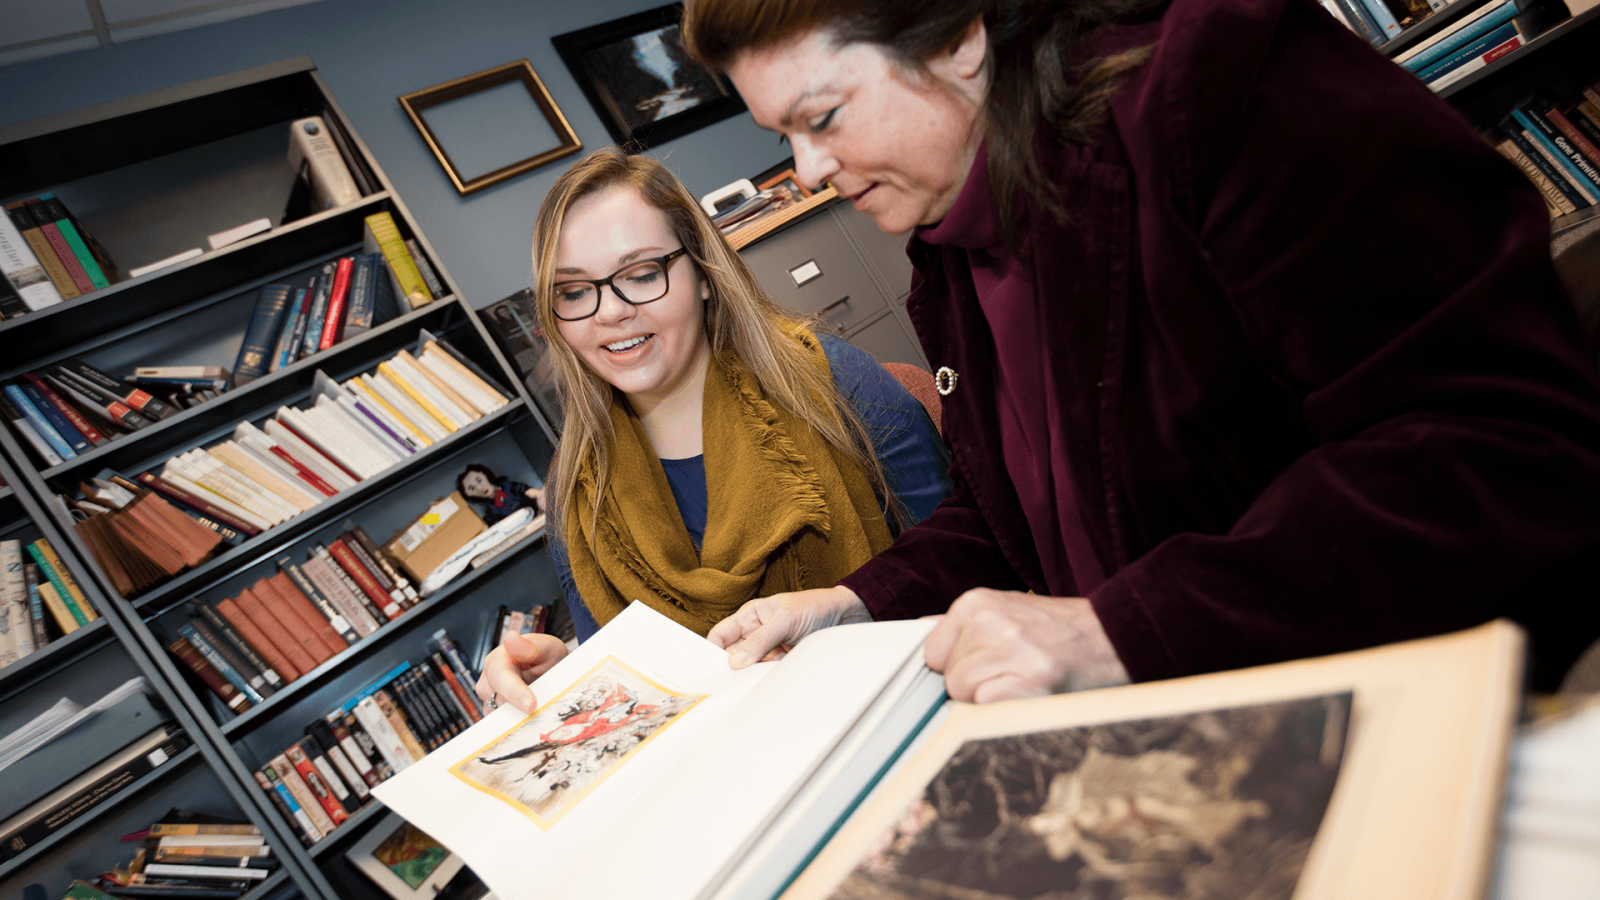 Professor Laura White shows student Amzie Dunekacke an illustrated book from the nineteenth century